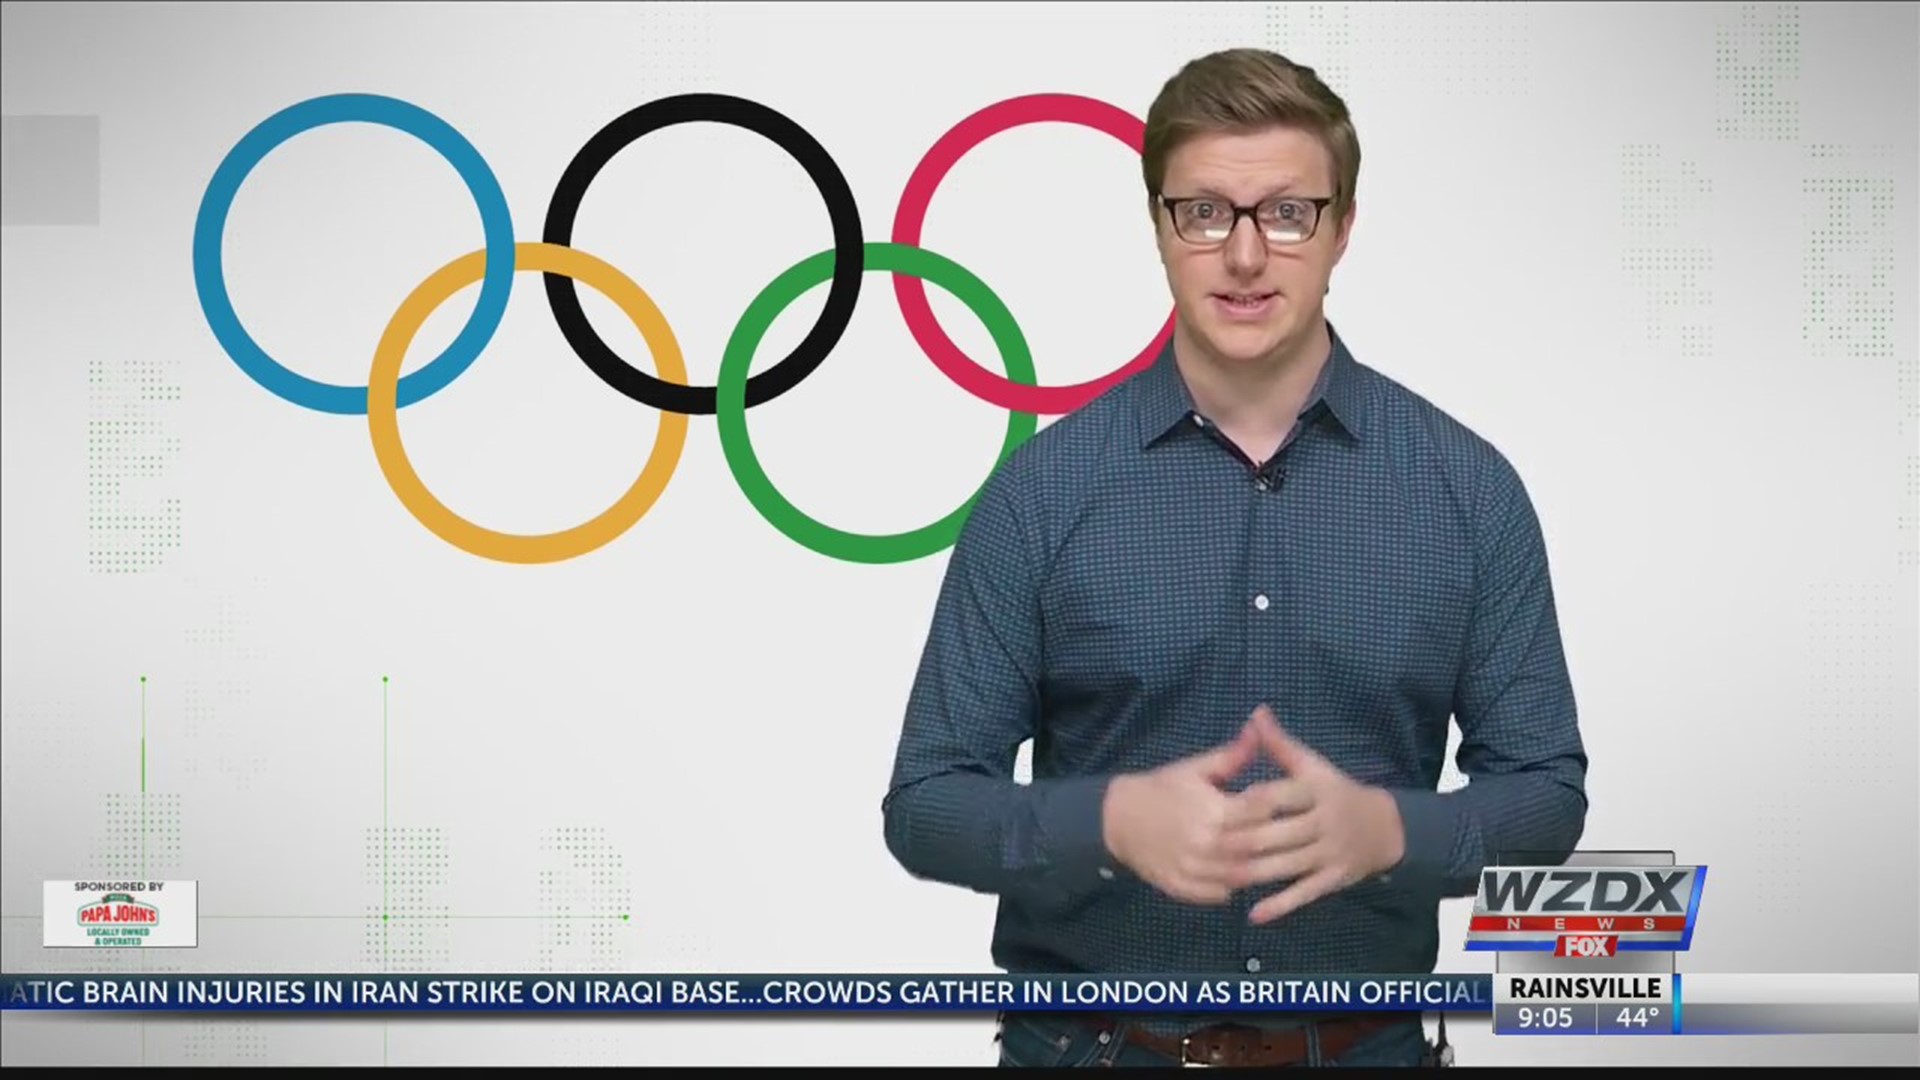 Rumors that the 2020 Olympics have been cancelled continue to spread online.